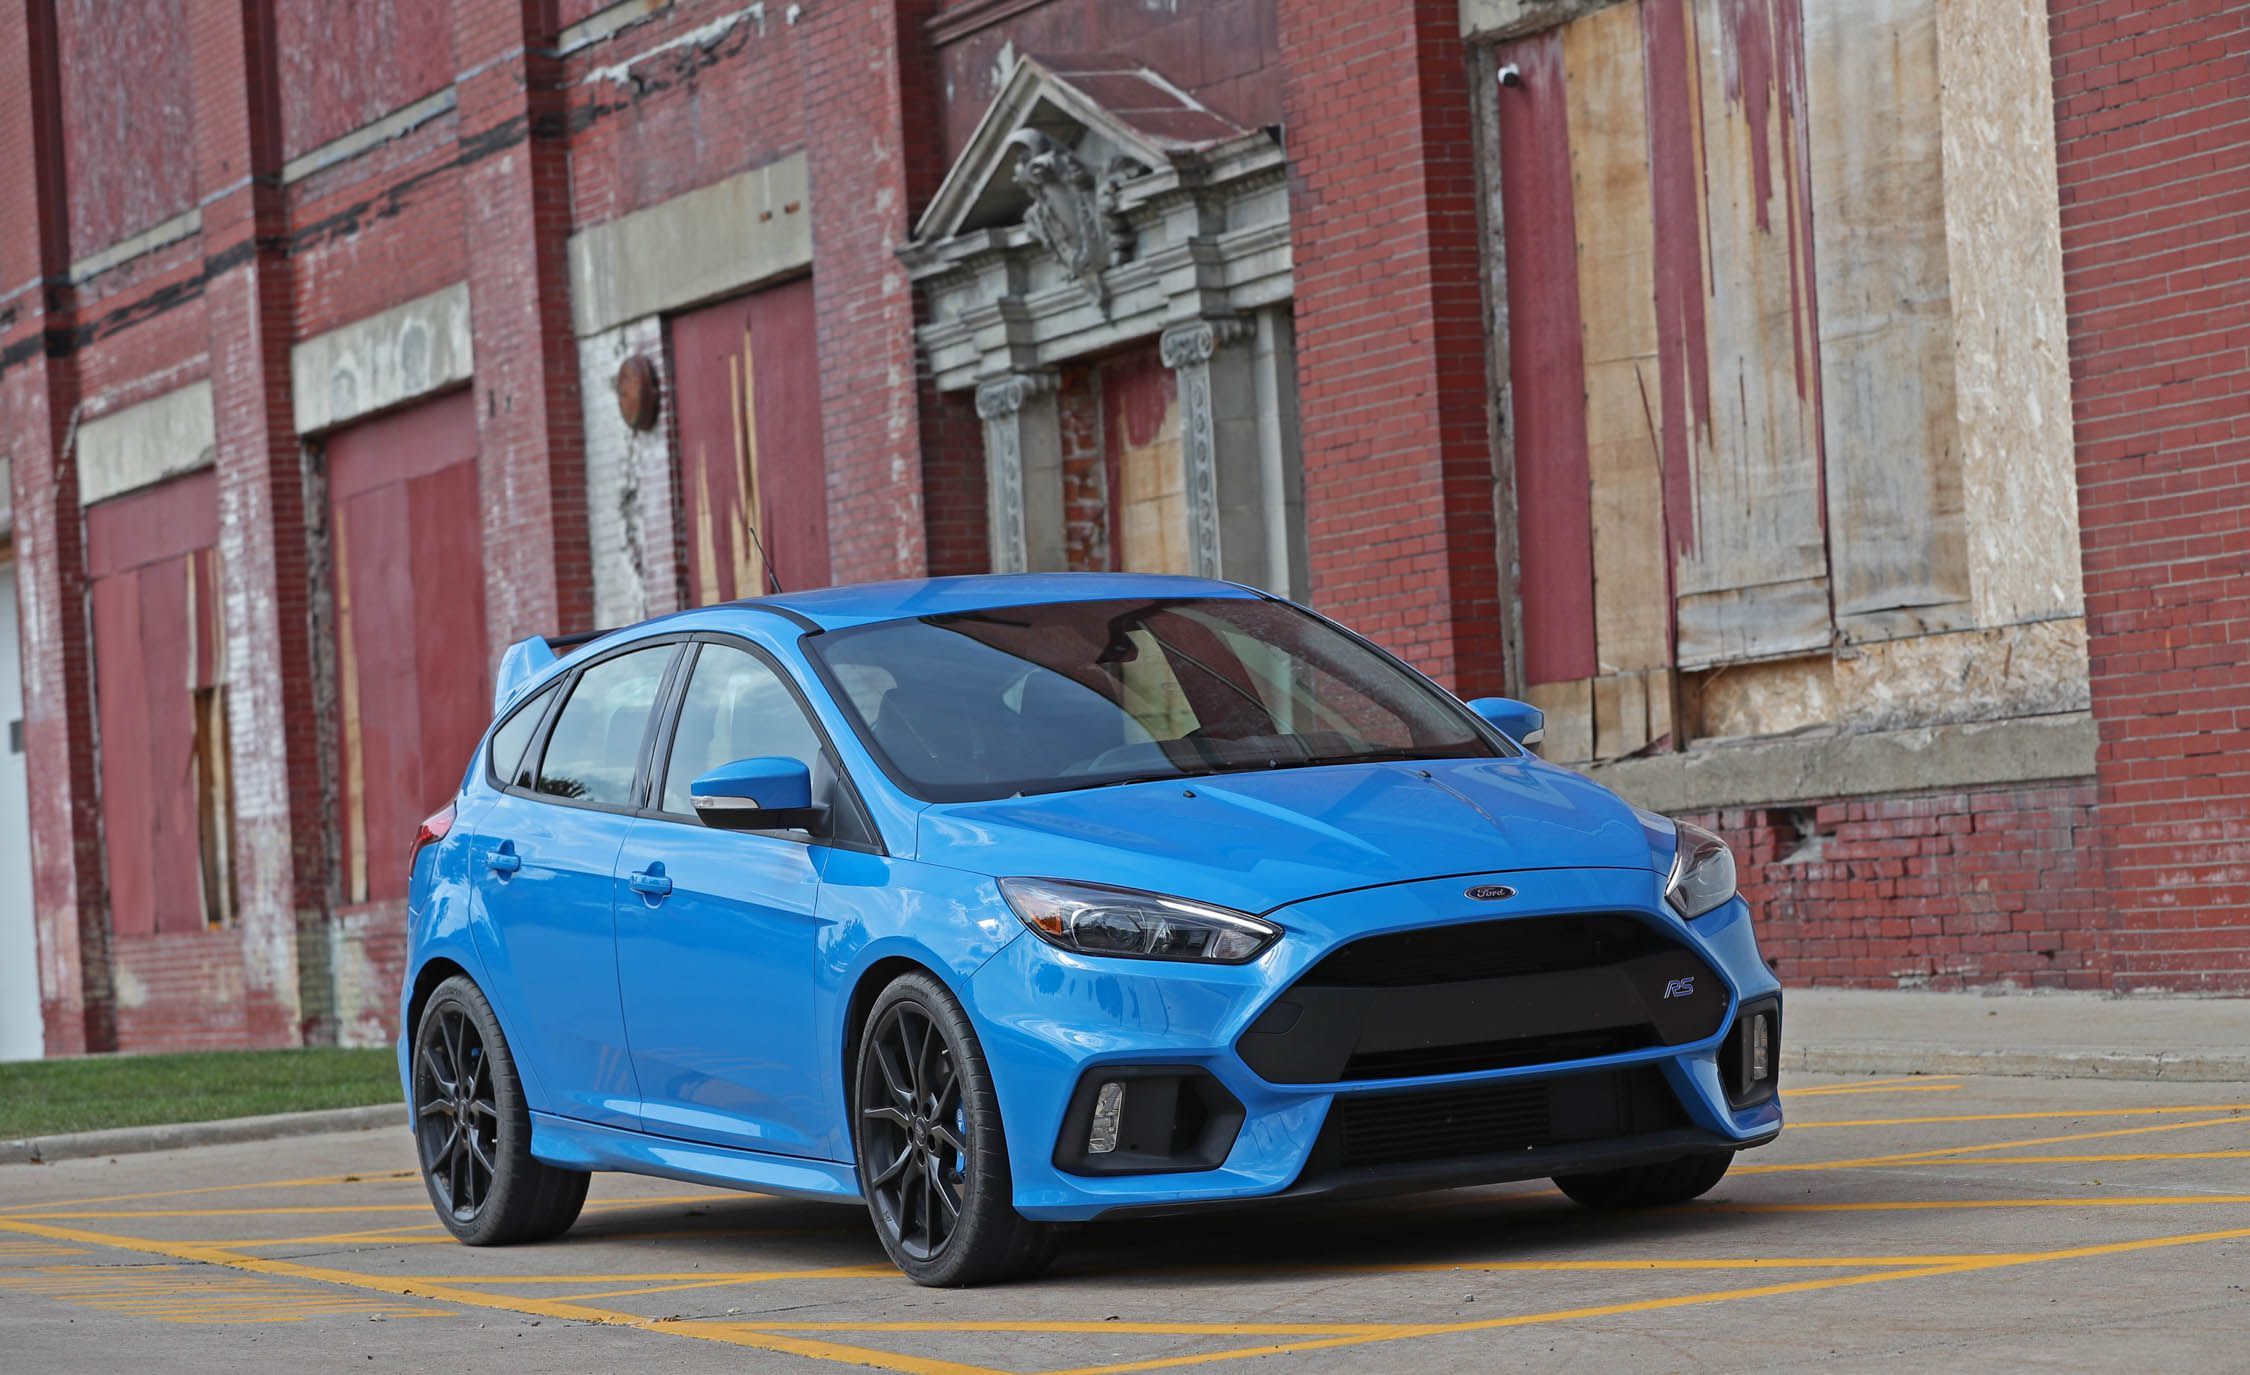 Ford Focus RS Reviews | Ford Focus RS Price, Photos, and Specs | Car